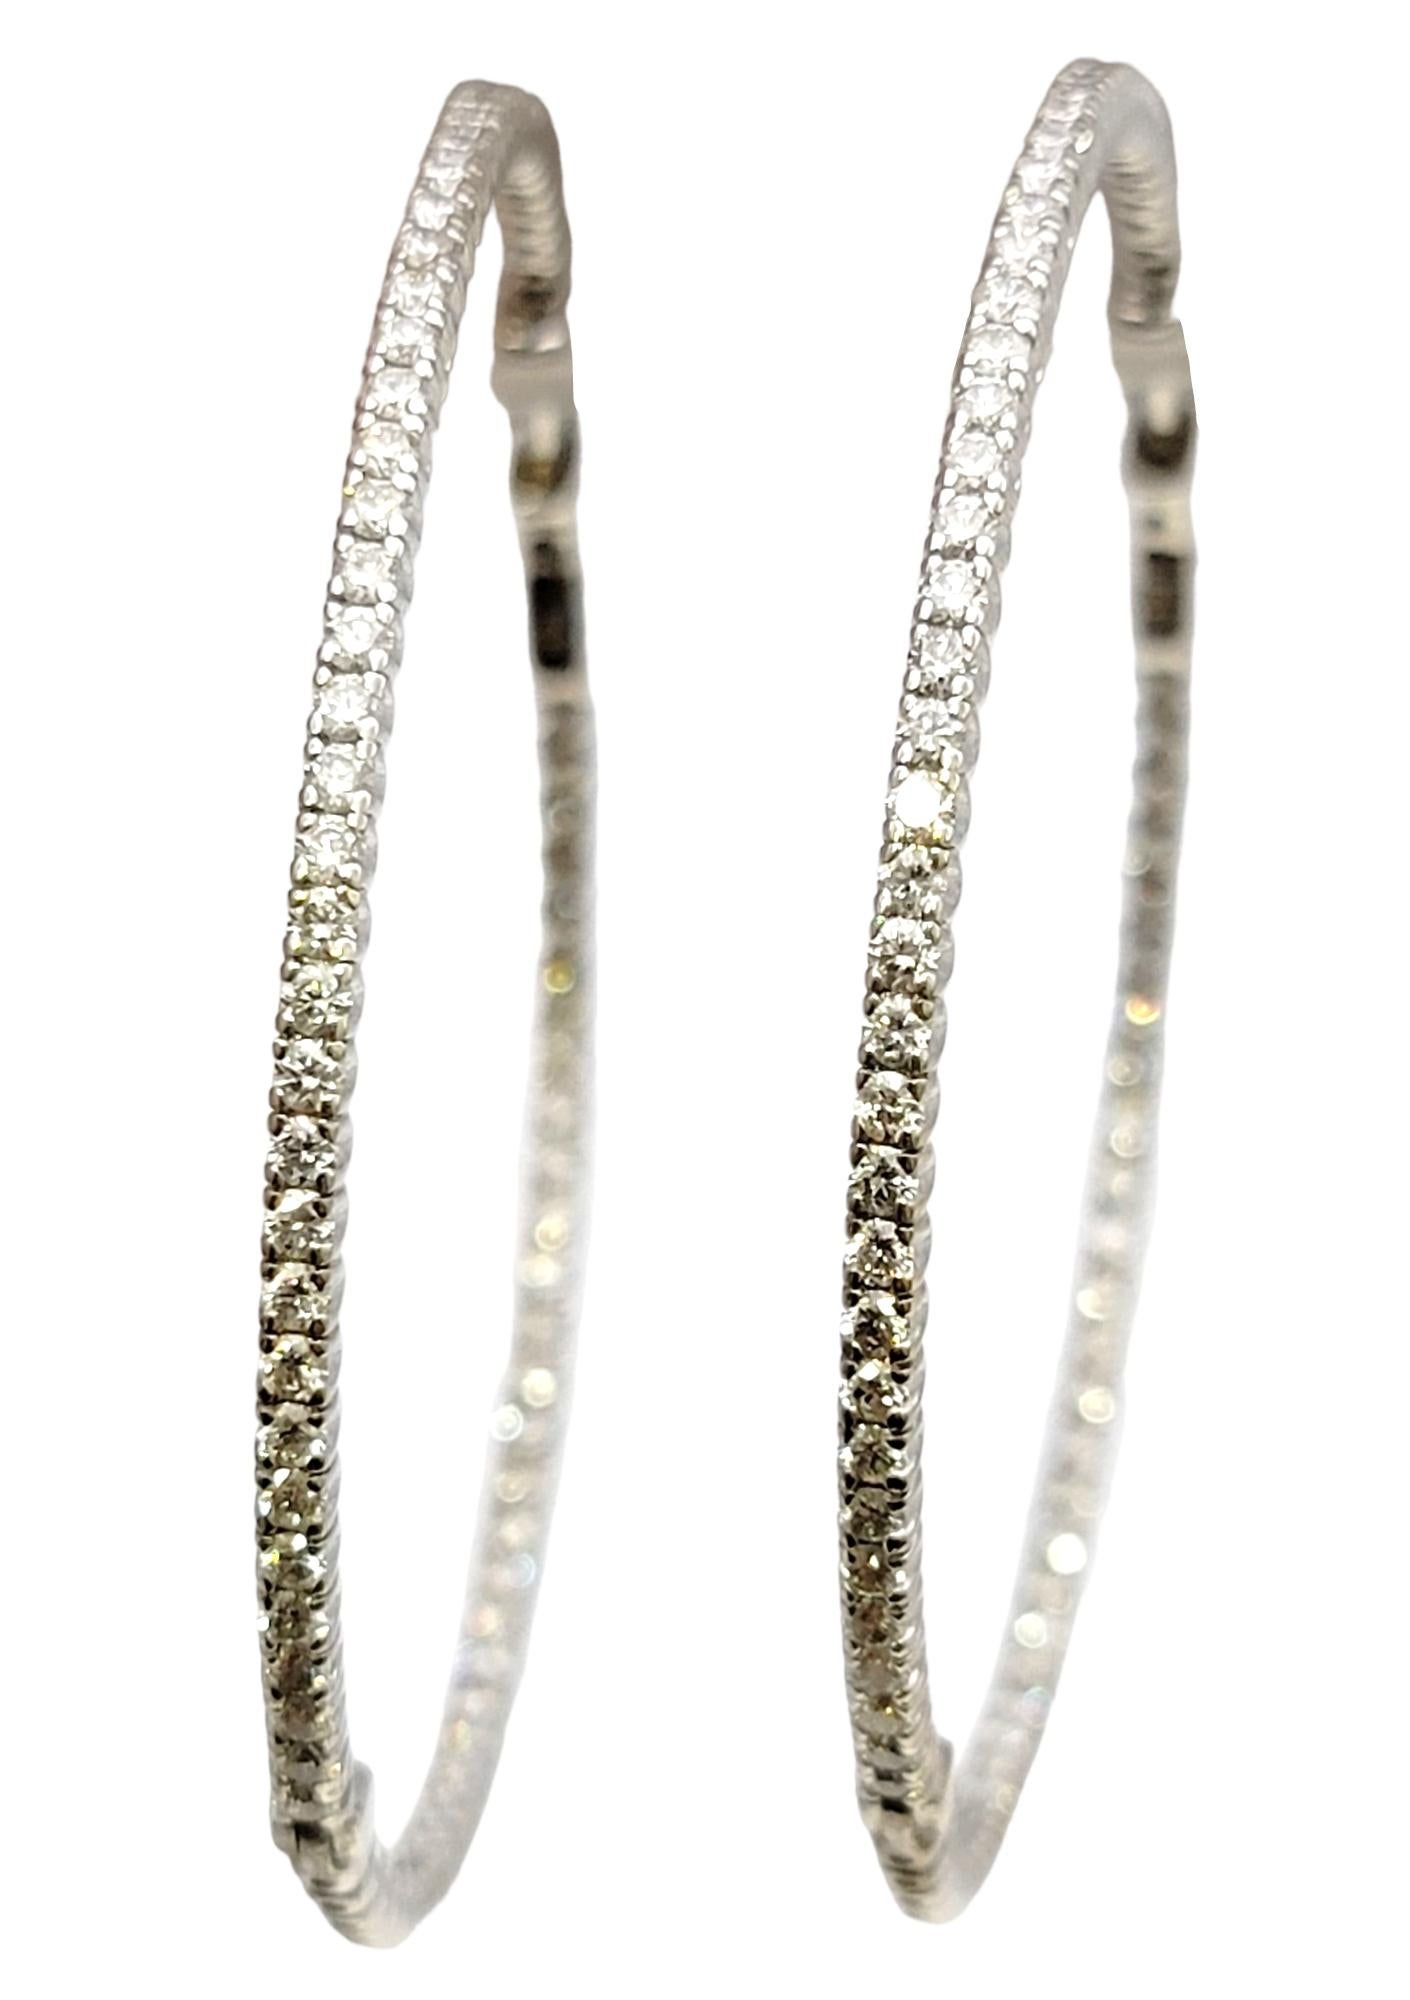 Absolutely gorgeous oversize pave diamond hoop earrings. The stunning pair are arranged in a delicate inside/outside setting, so the diamonds are positioned to catch the light from all angles. Hanging just over 2 inches long, these chic earrings are